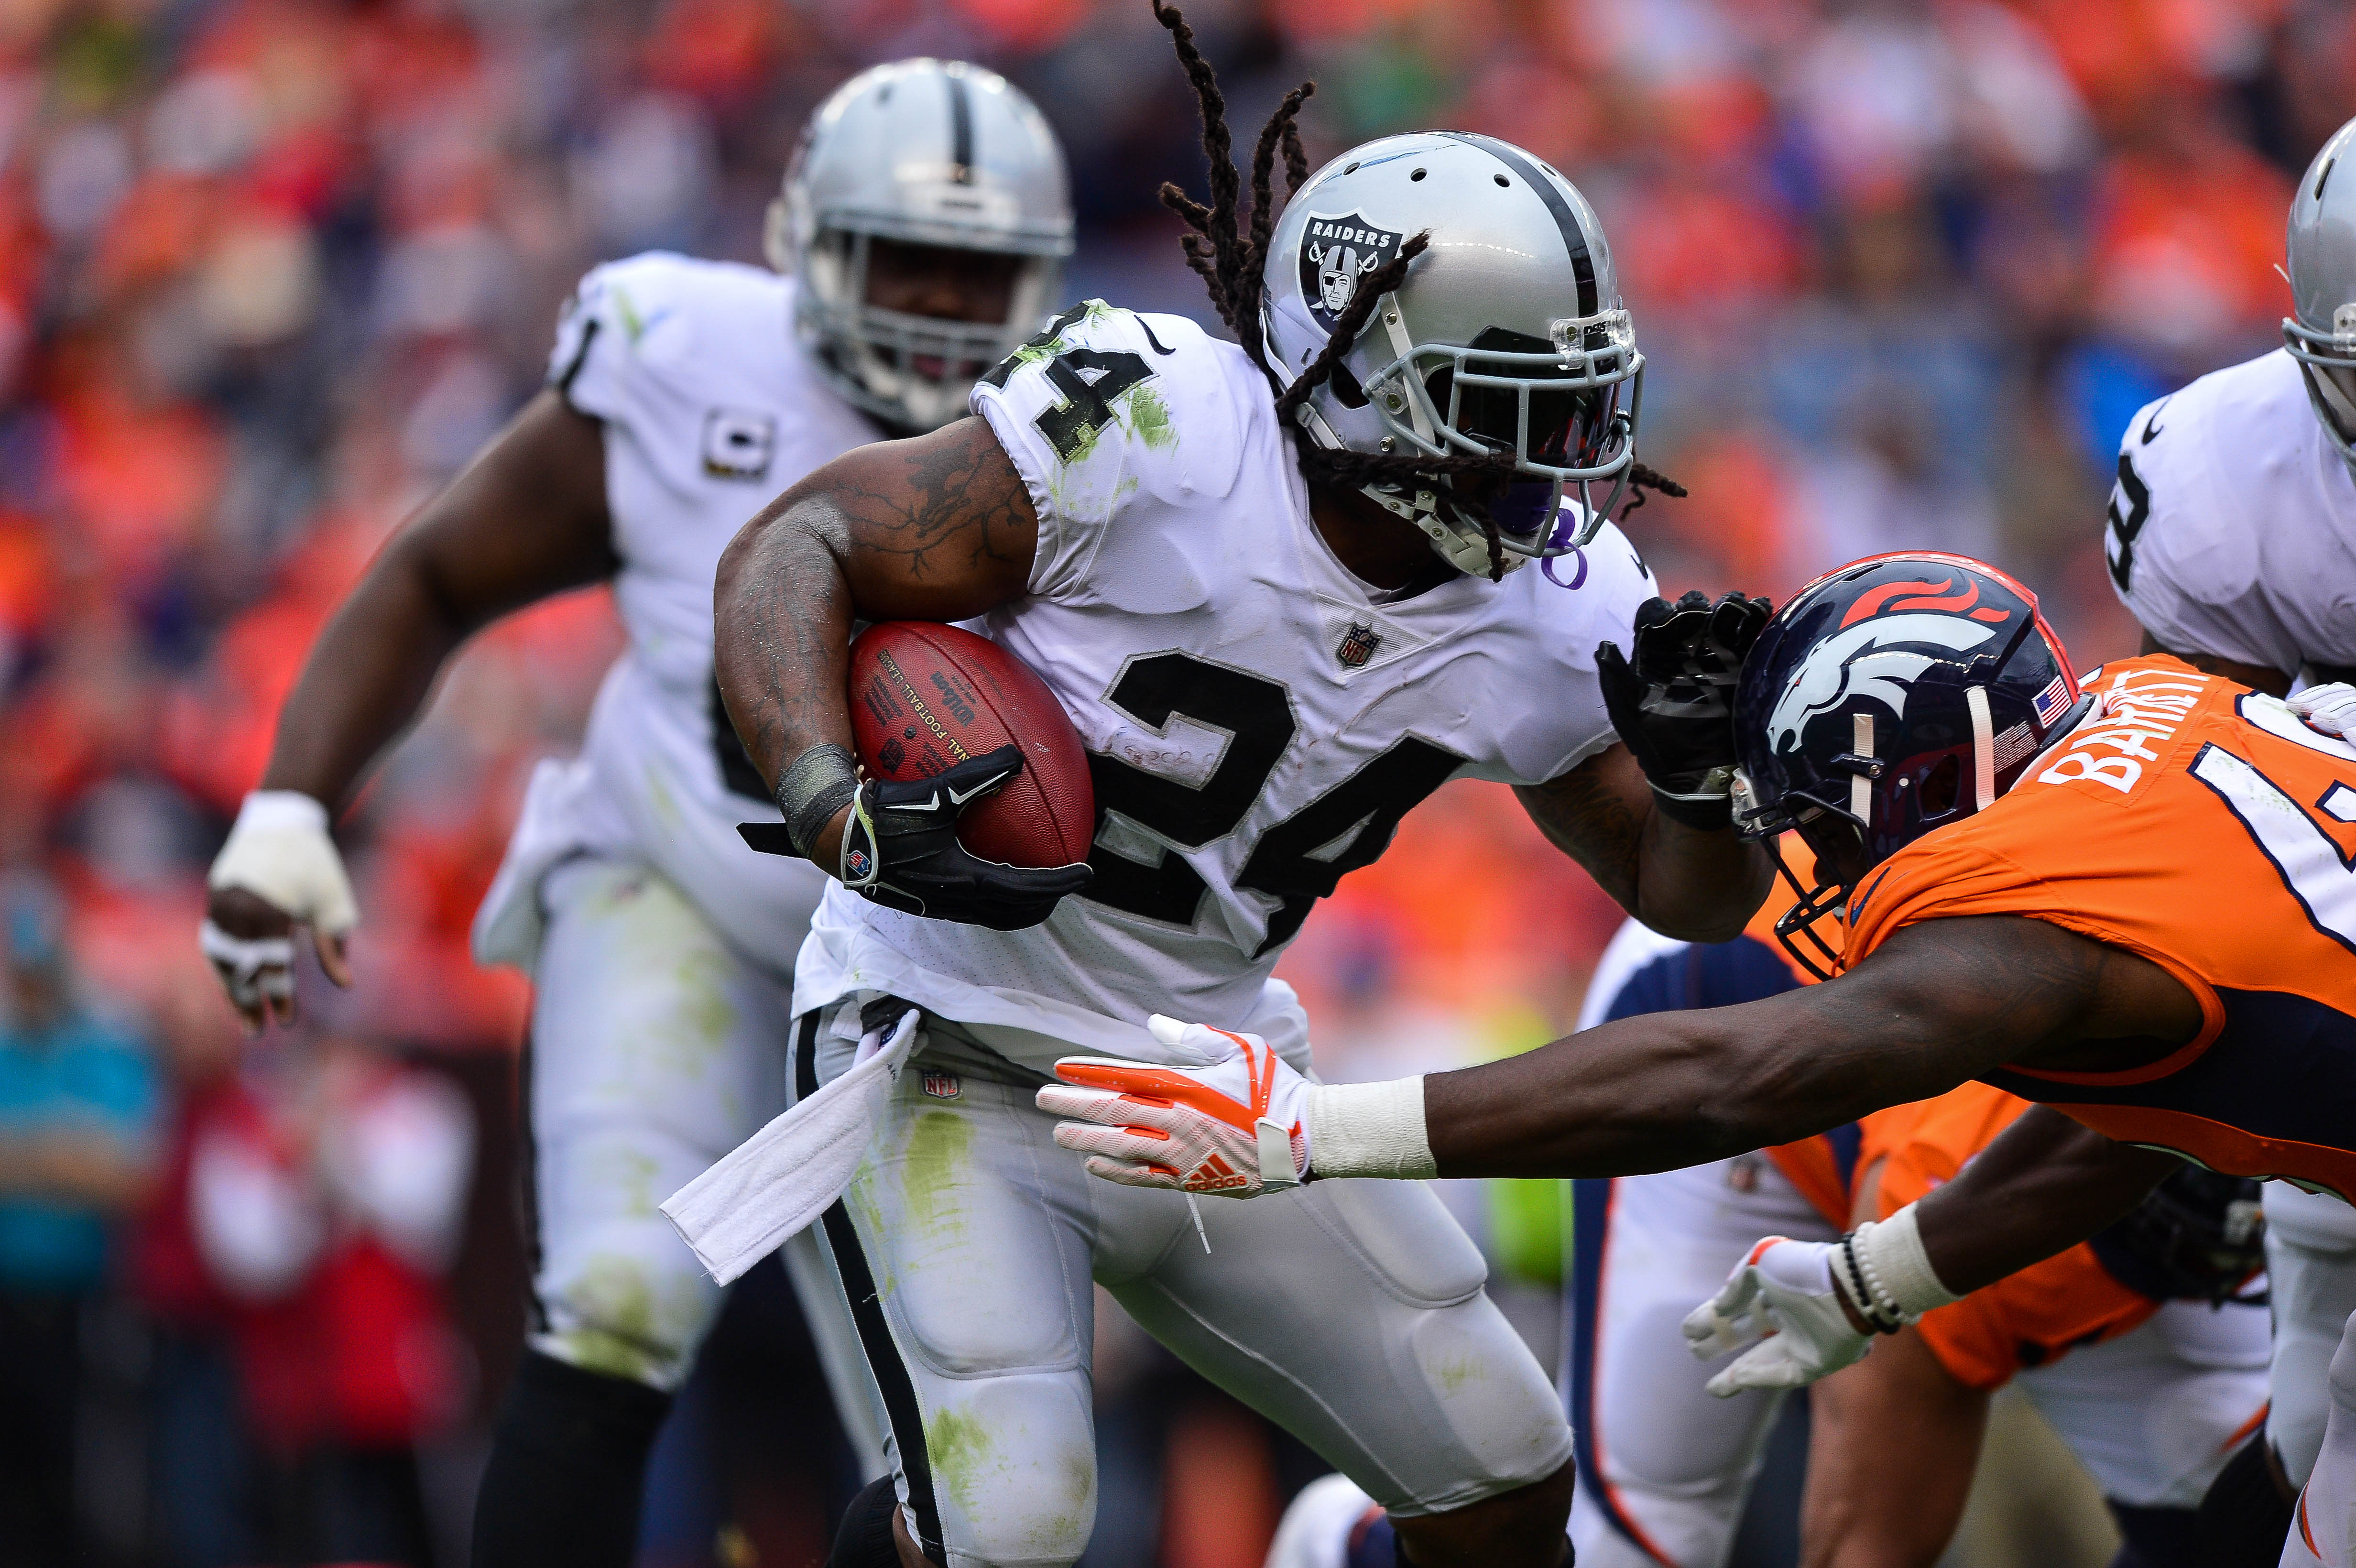 DENVER, CO - OCTOBER 1: Running back Marshawn Lynch #24 of the Oakland Raiders rushes against the Denver Broncos int he first quarter of a game at Sports Authority Field at Mile High on October 1, 2017 in Denver, Colorado.